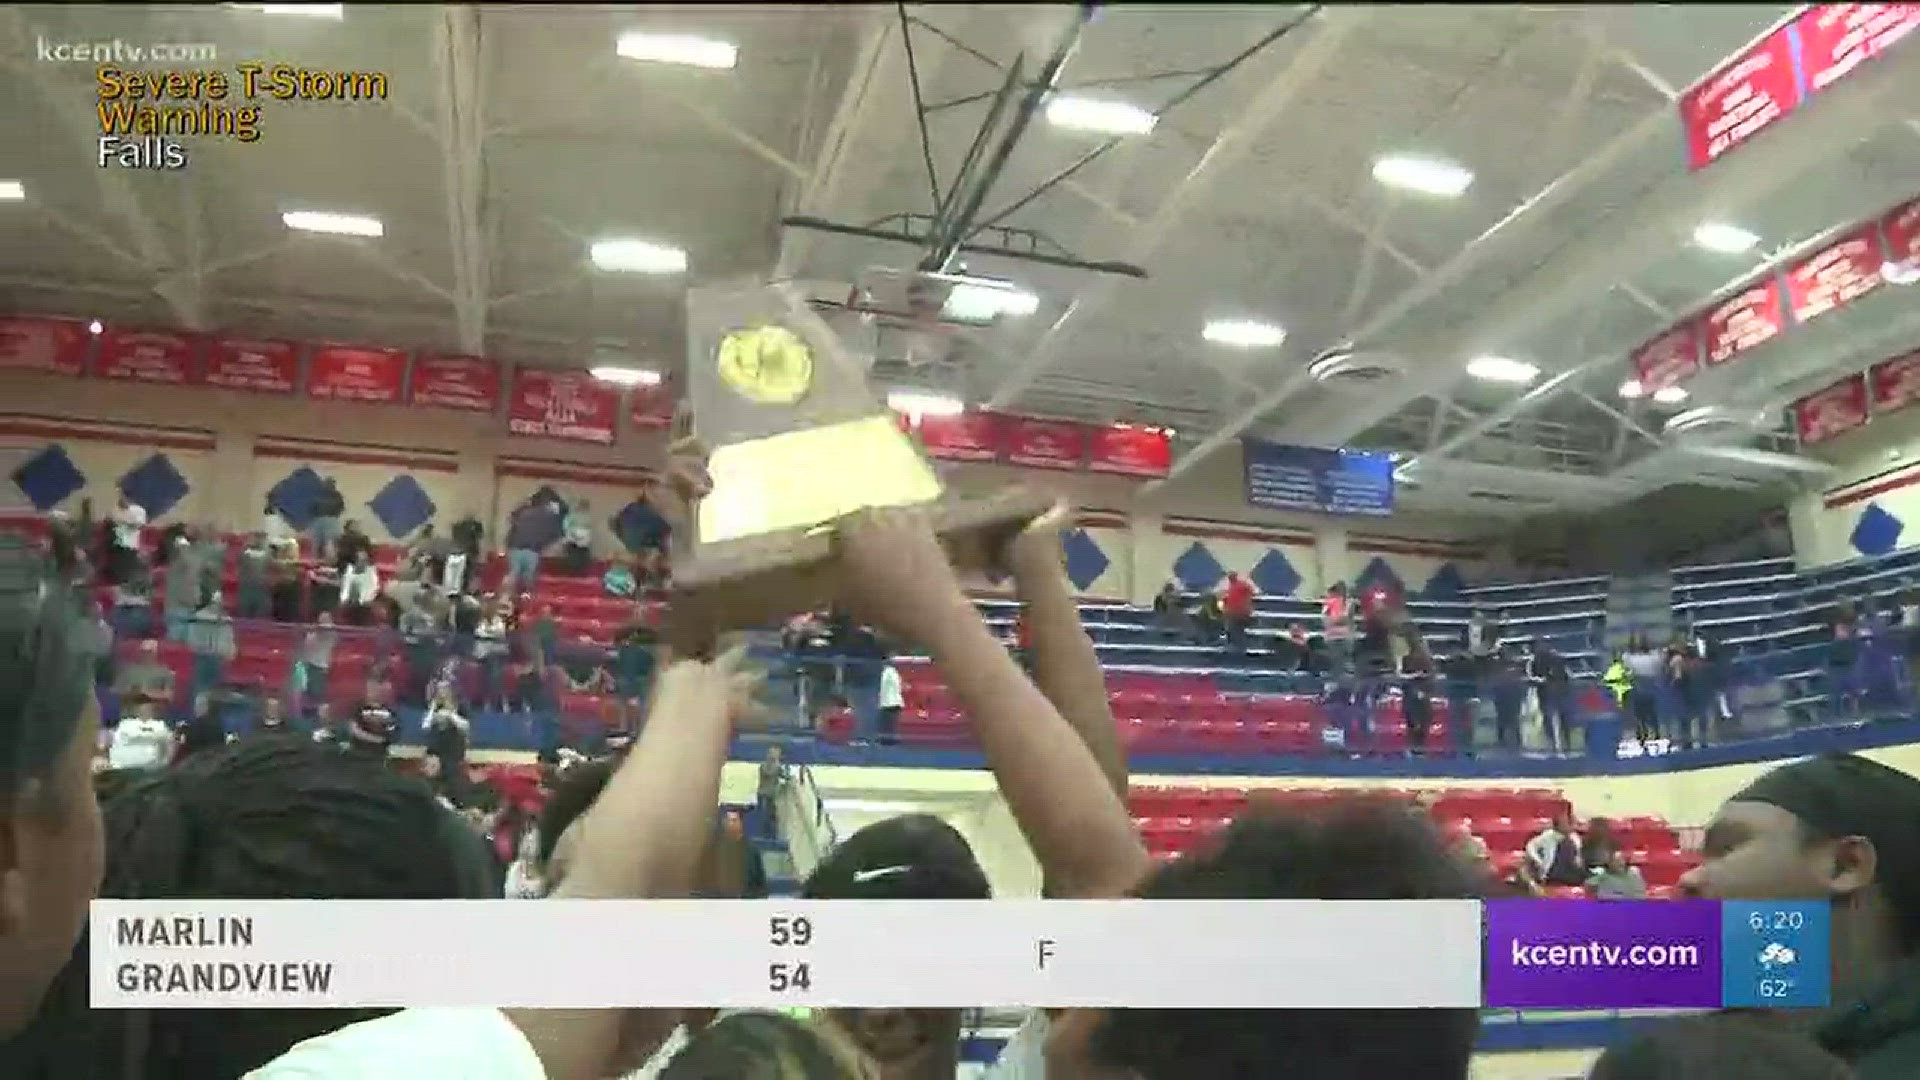 Marlin beat Grandview 59-54 in the Class 3A region III final at Midway on Saturday